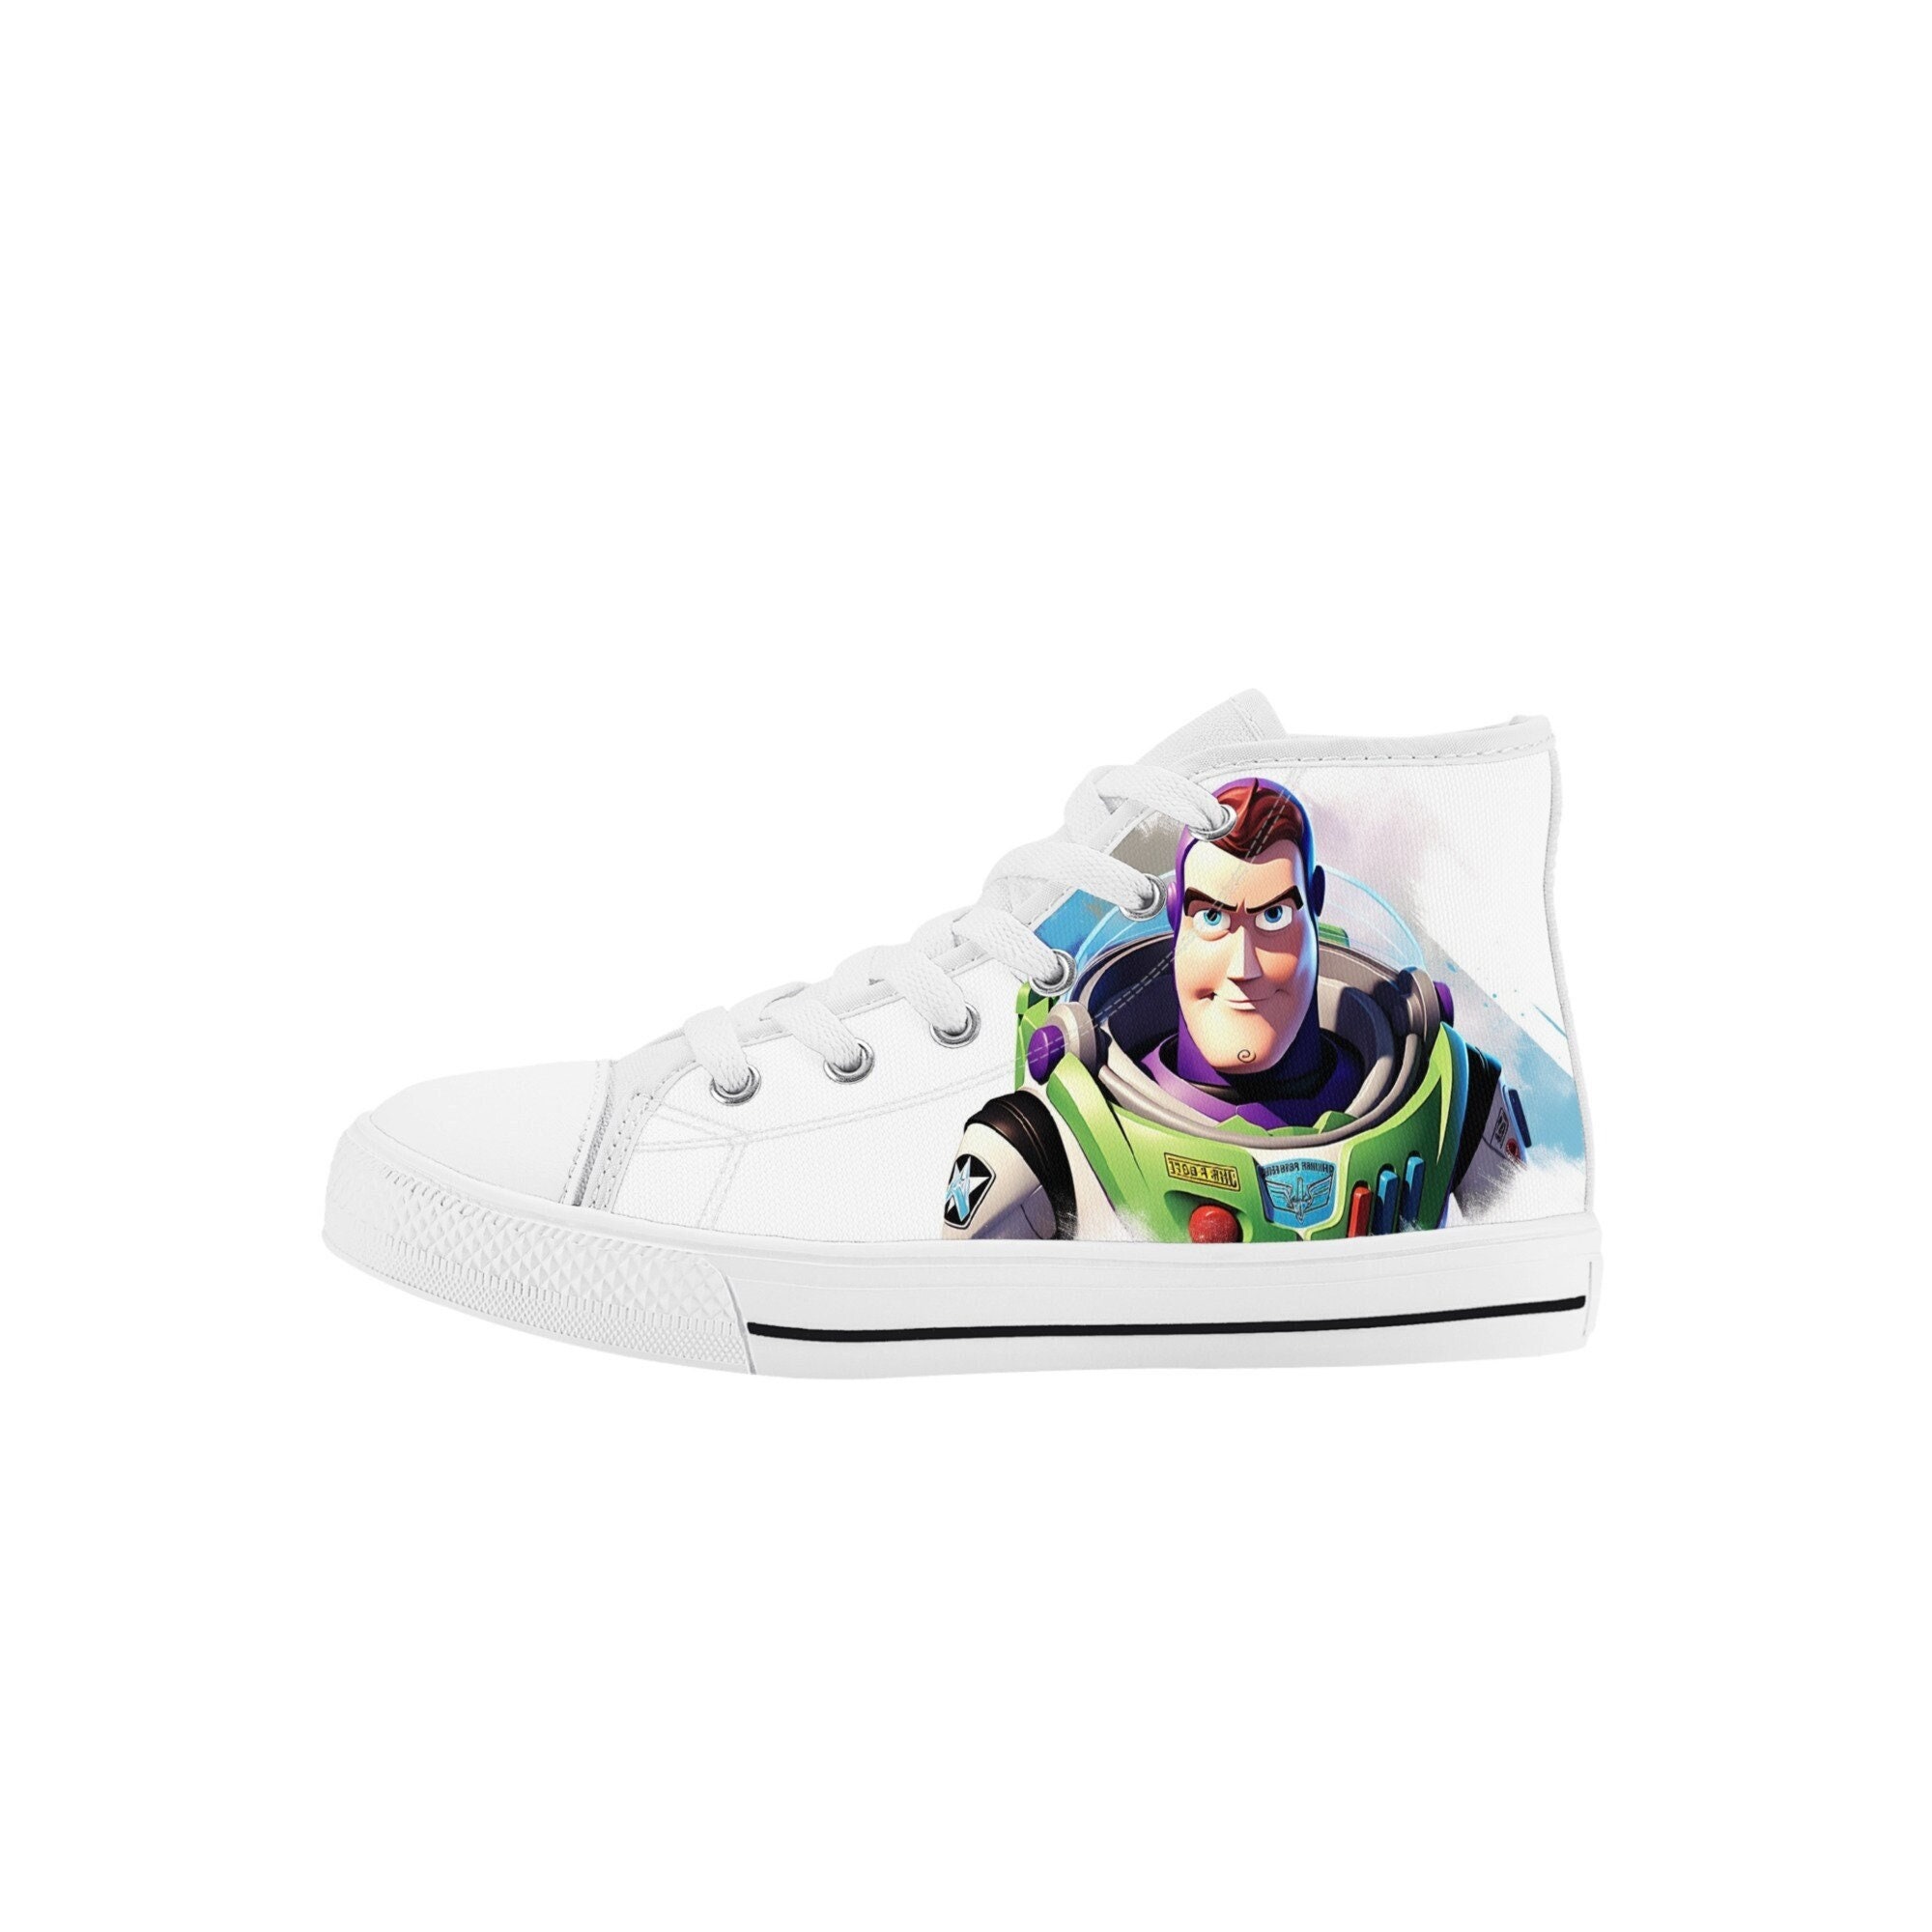 Buzz Lightyear for Crocs, Shoes pins, Crocs accessories, Cute and trendy  shoes charms